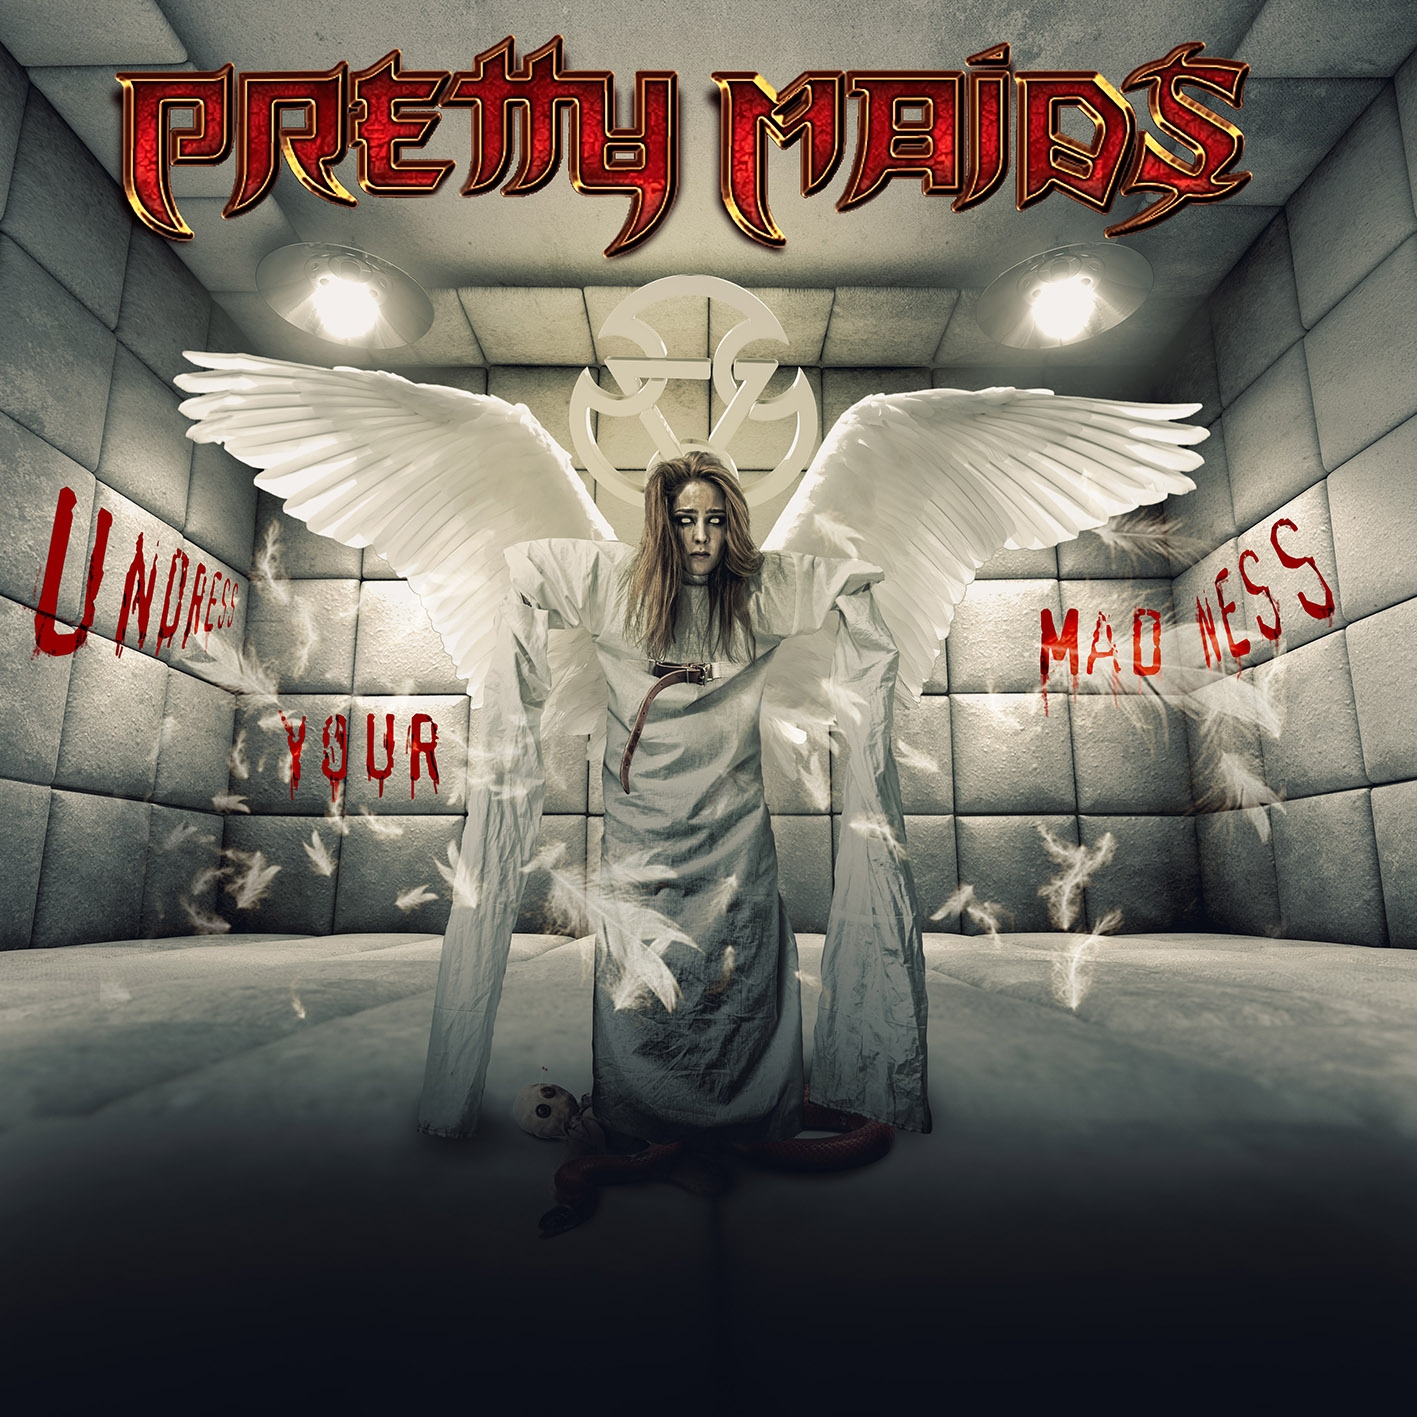 PRETTY MAIDS - “Undress Your Madness”